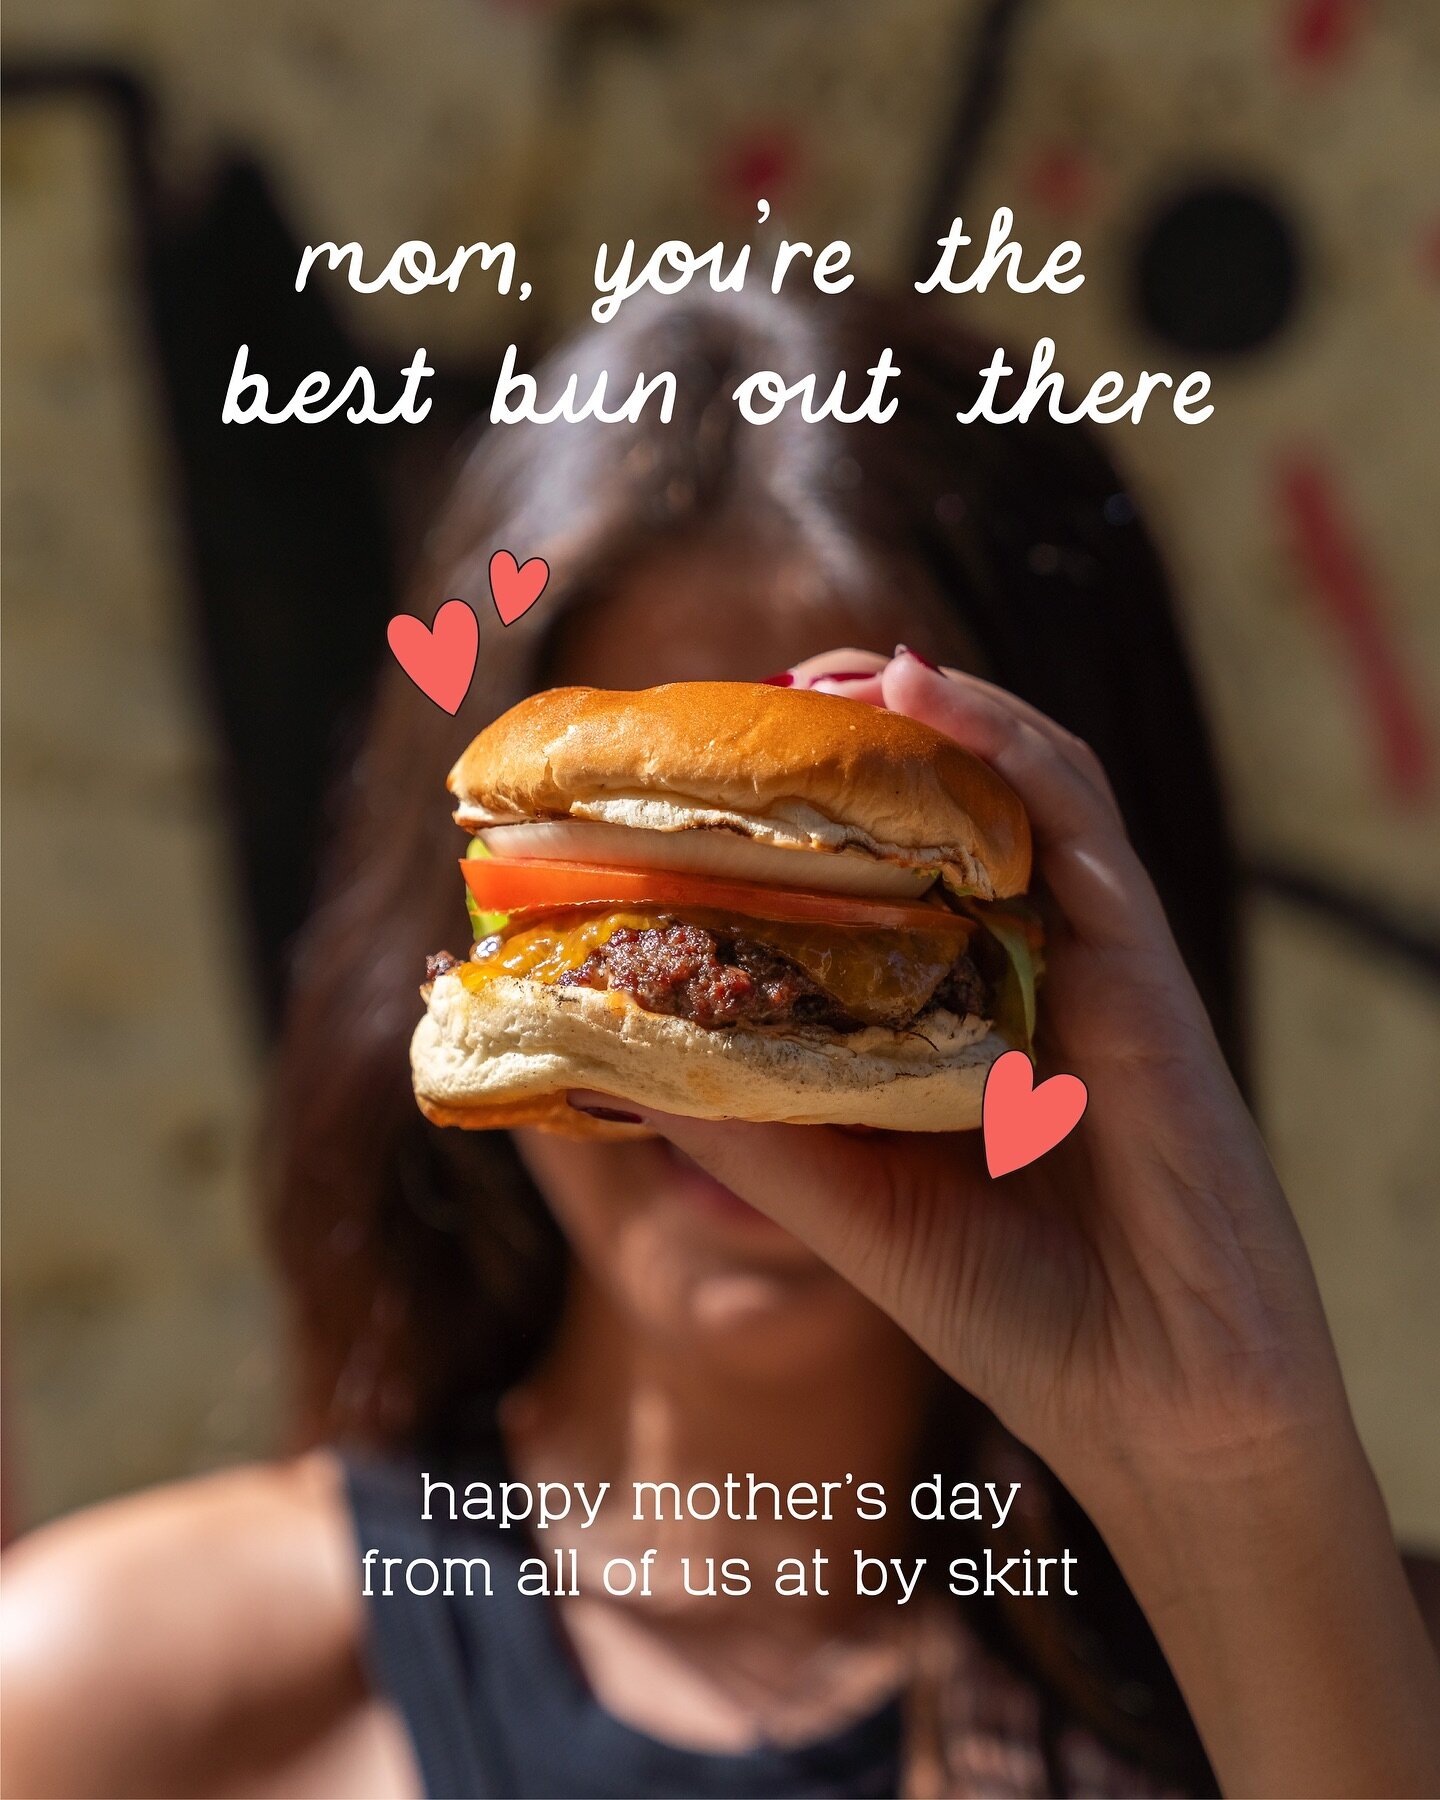 Happy Mother&rsquo;s Day from all of us at BySkirt &hearts;️